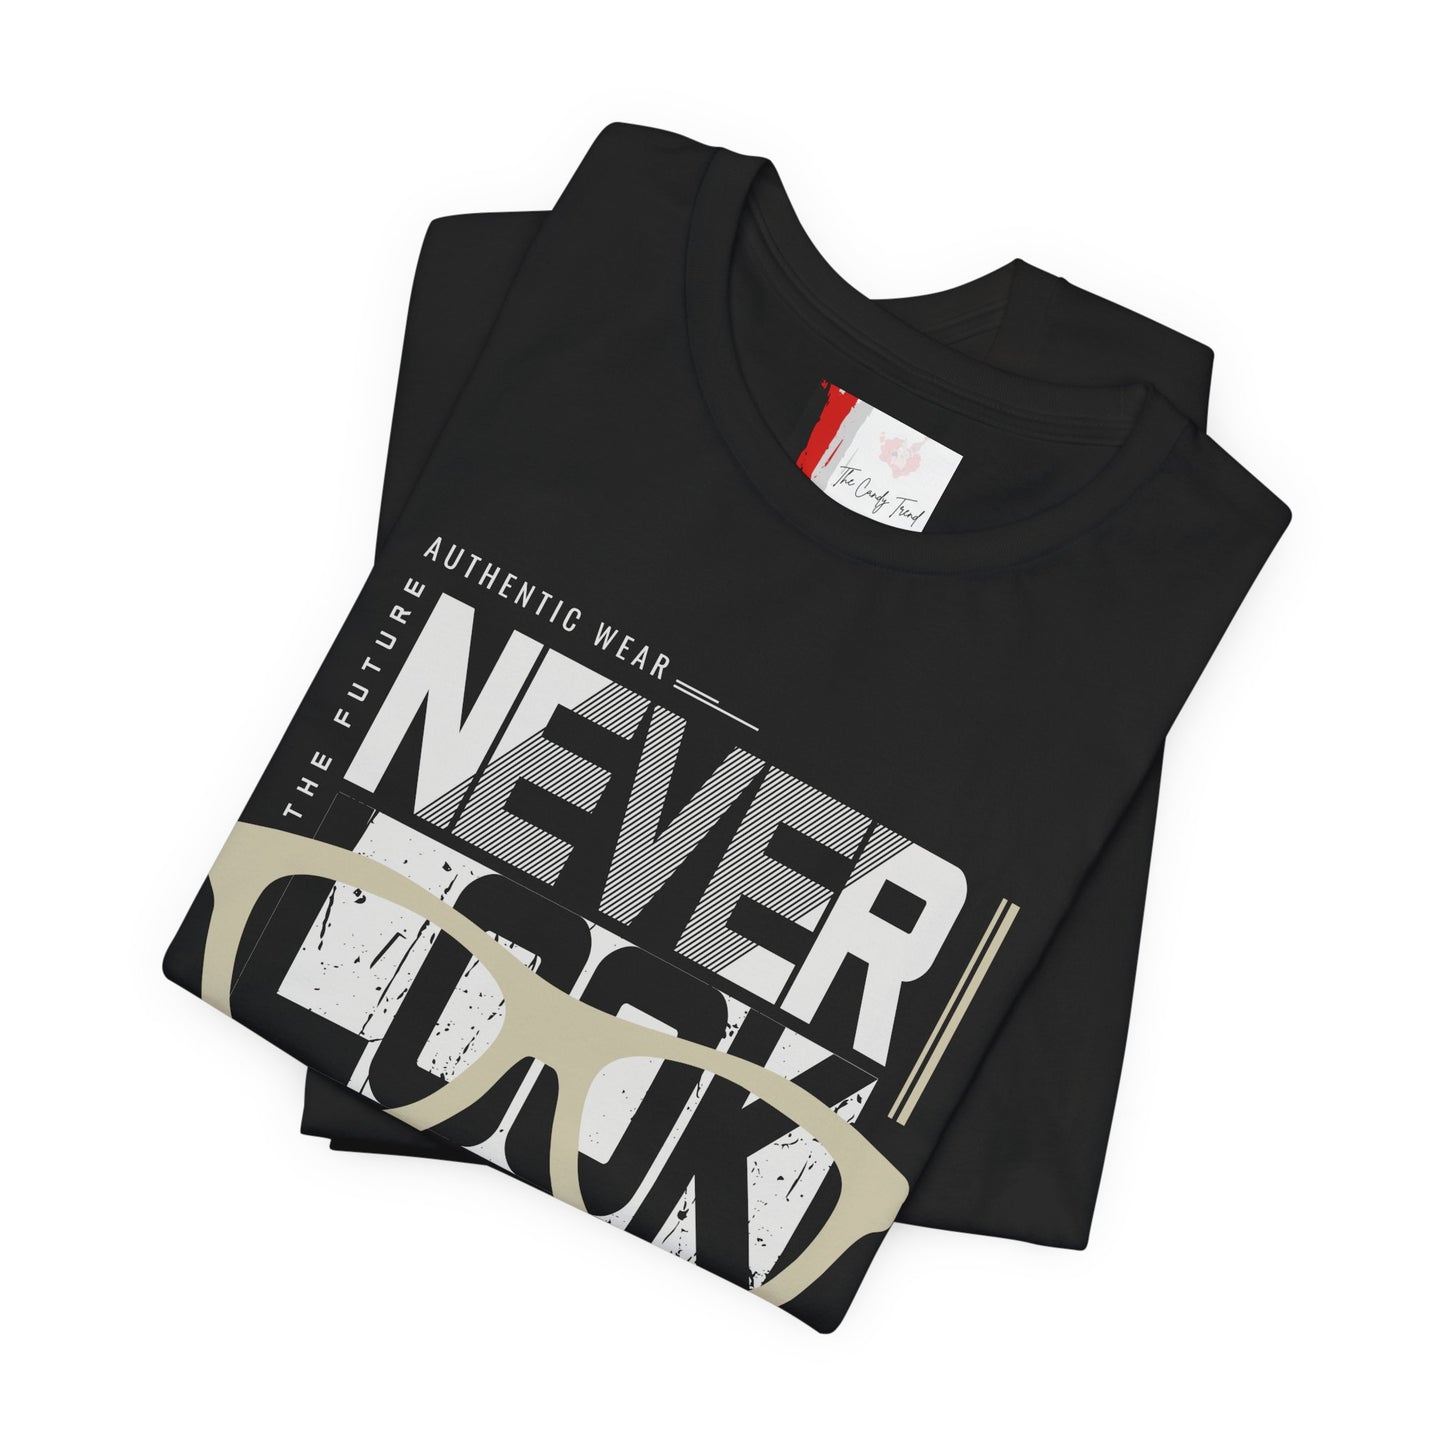 NEVER LOOK BACK GRAPHIC T-SHIRT